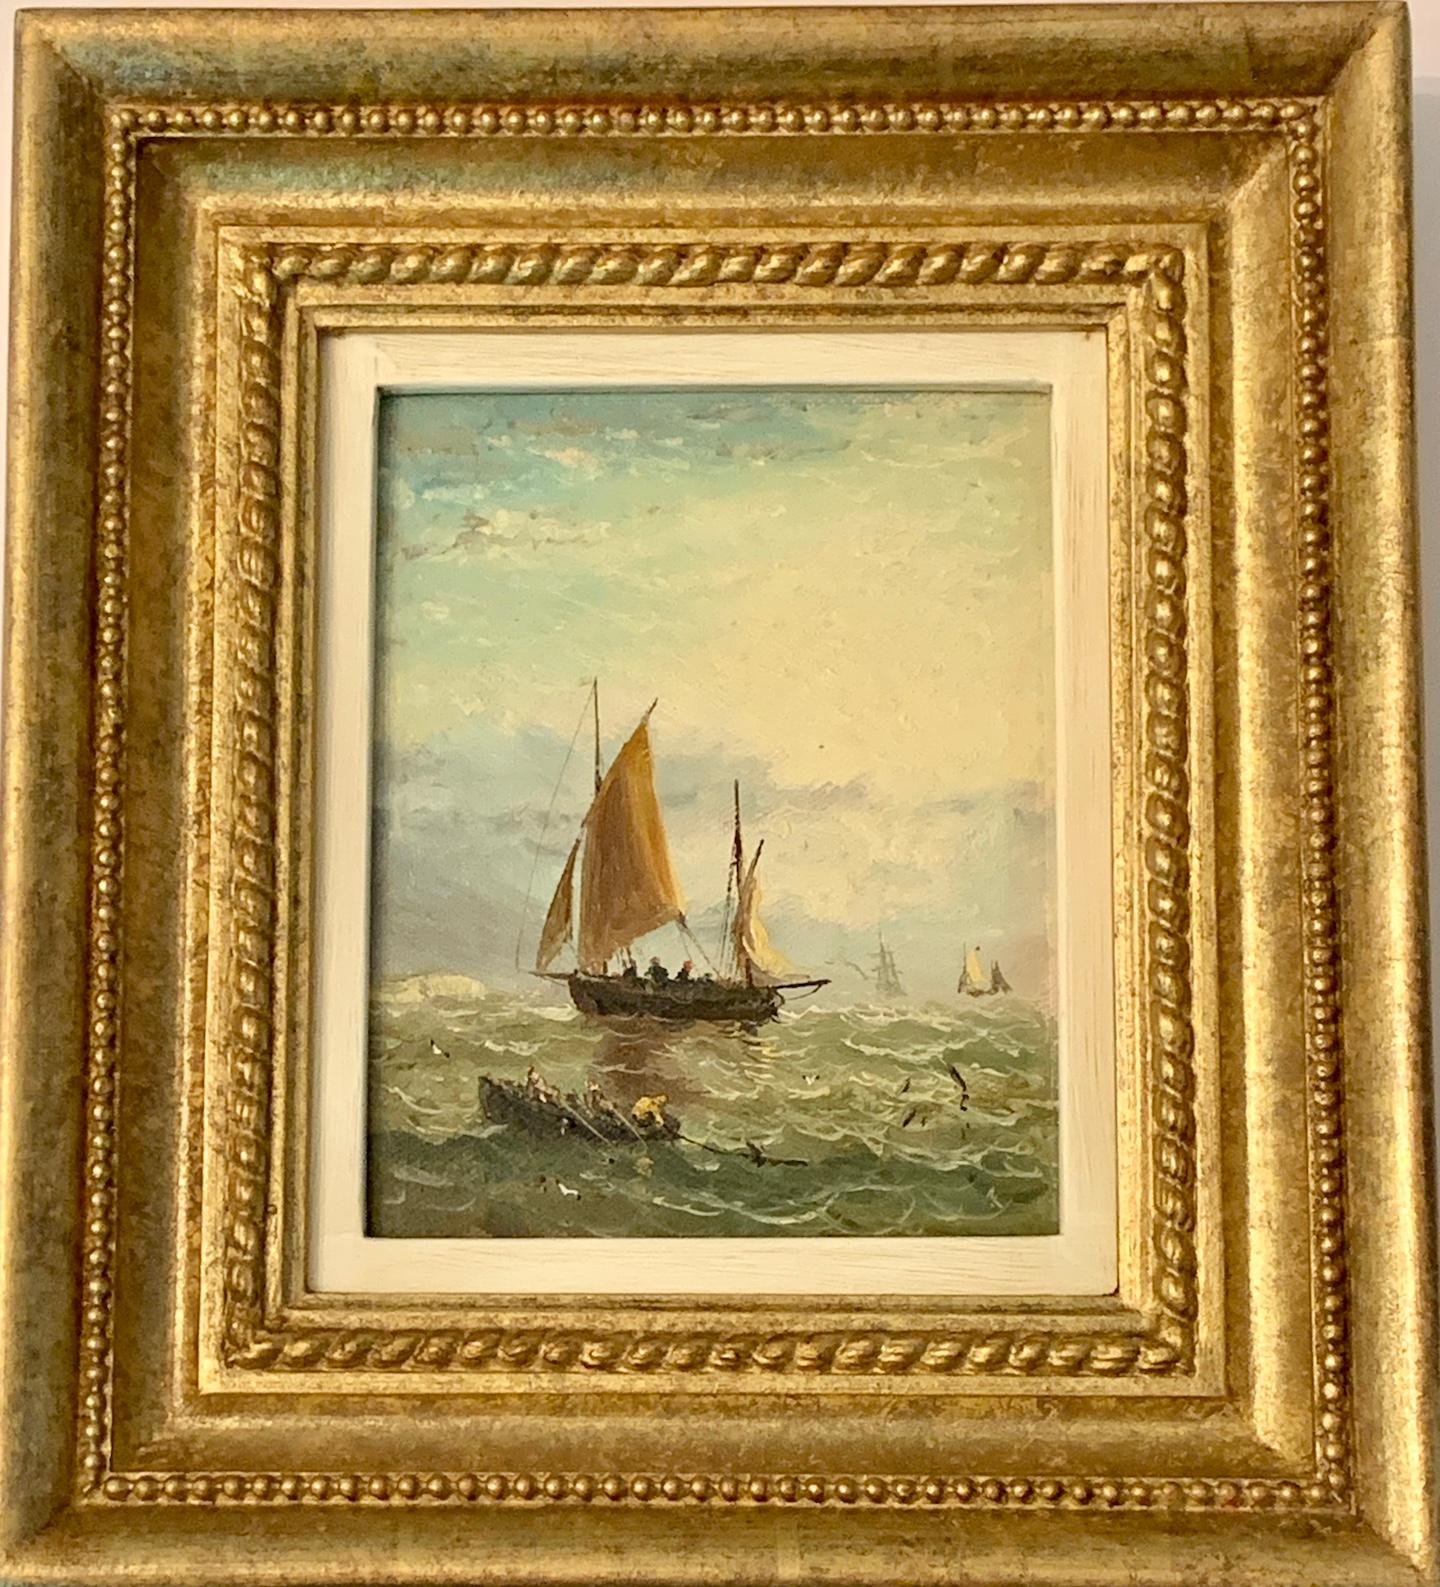 Adolphus Knell Figurative Painting - Antique Victorian, Impressionist 19th century English oil, Fishings boat at Sea